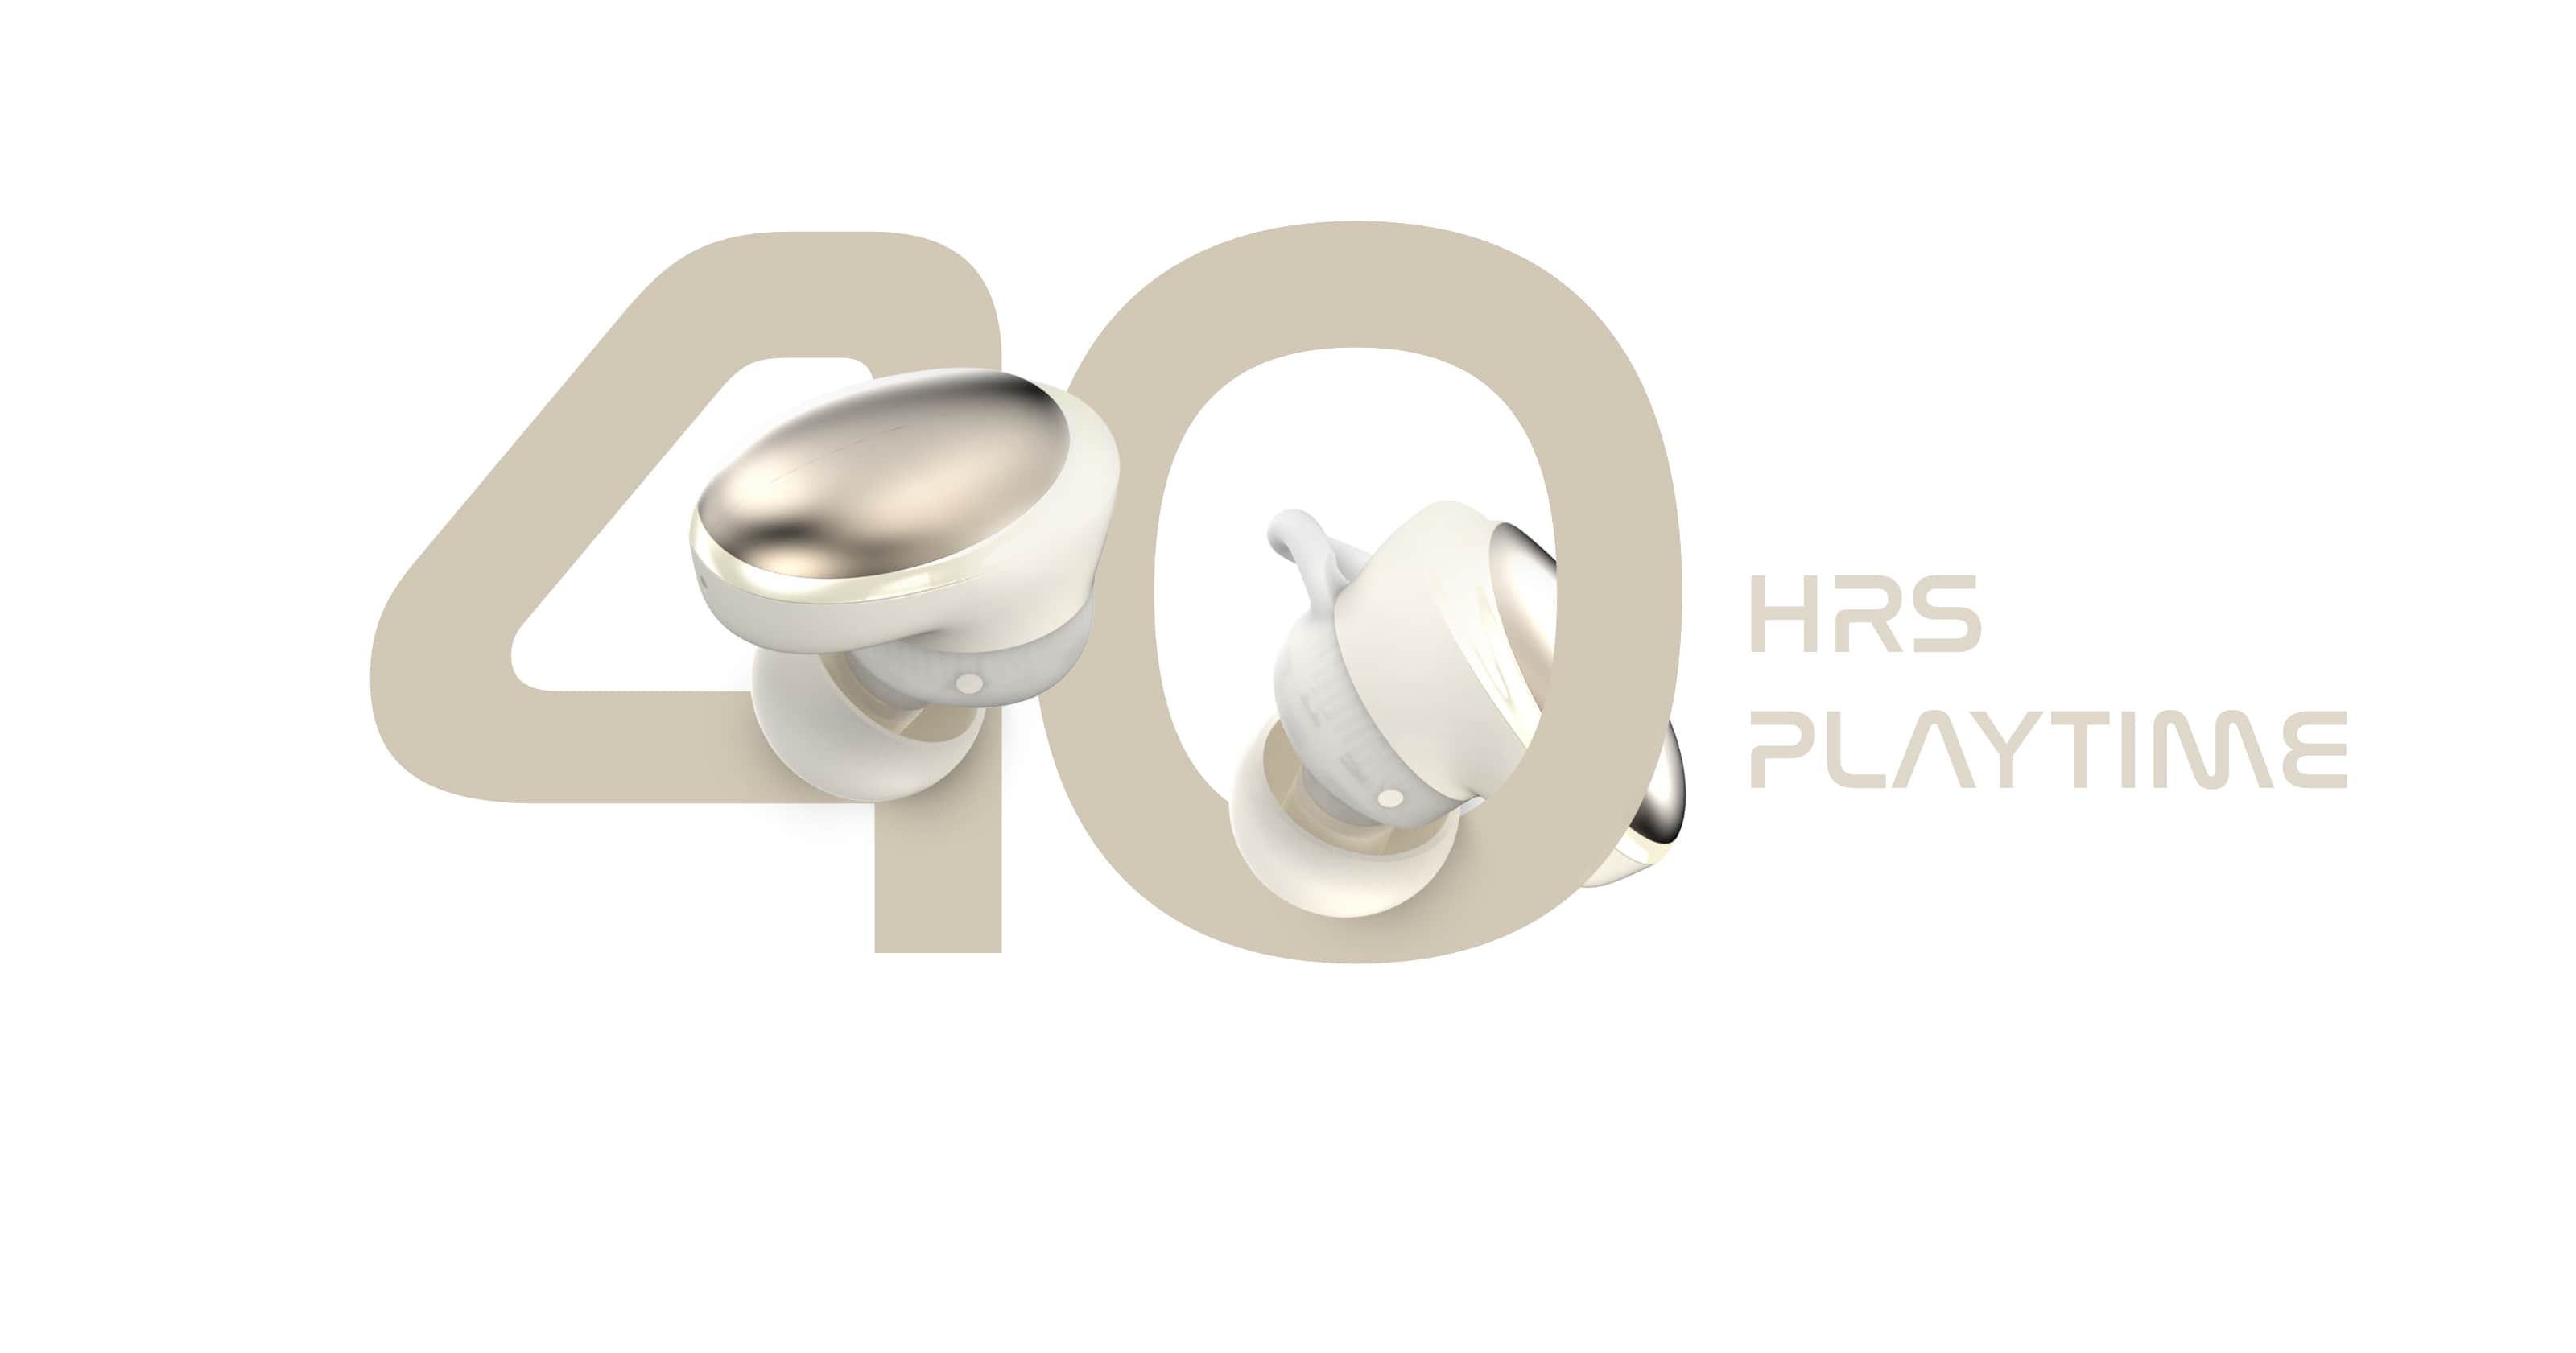 Hifuture Fusion wireless earbuds with upto 40 hours battery life